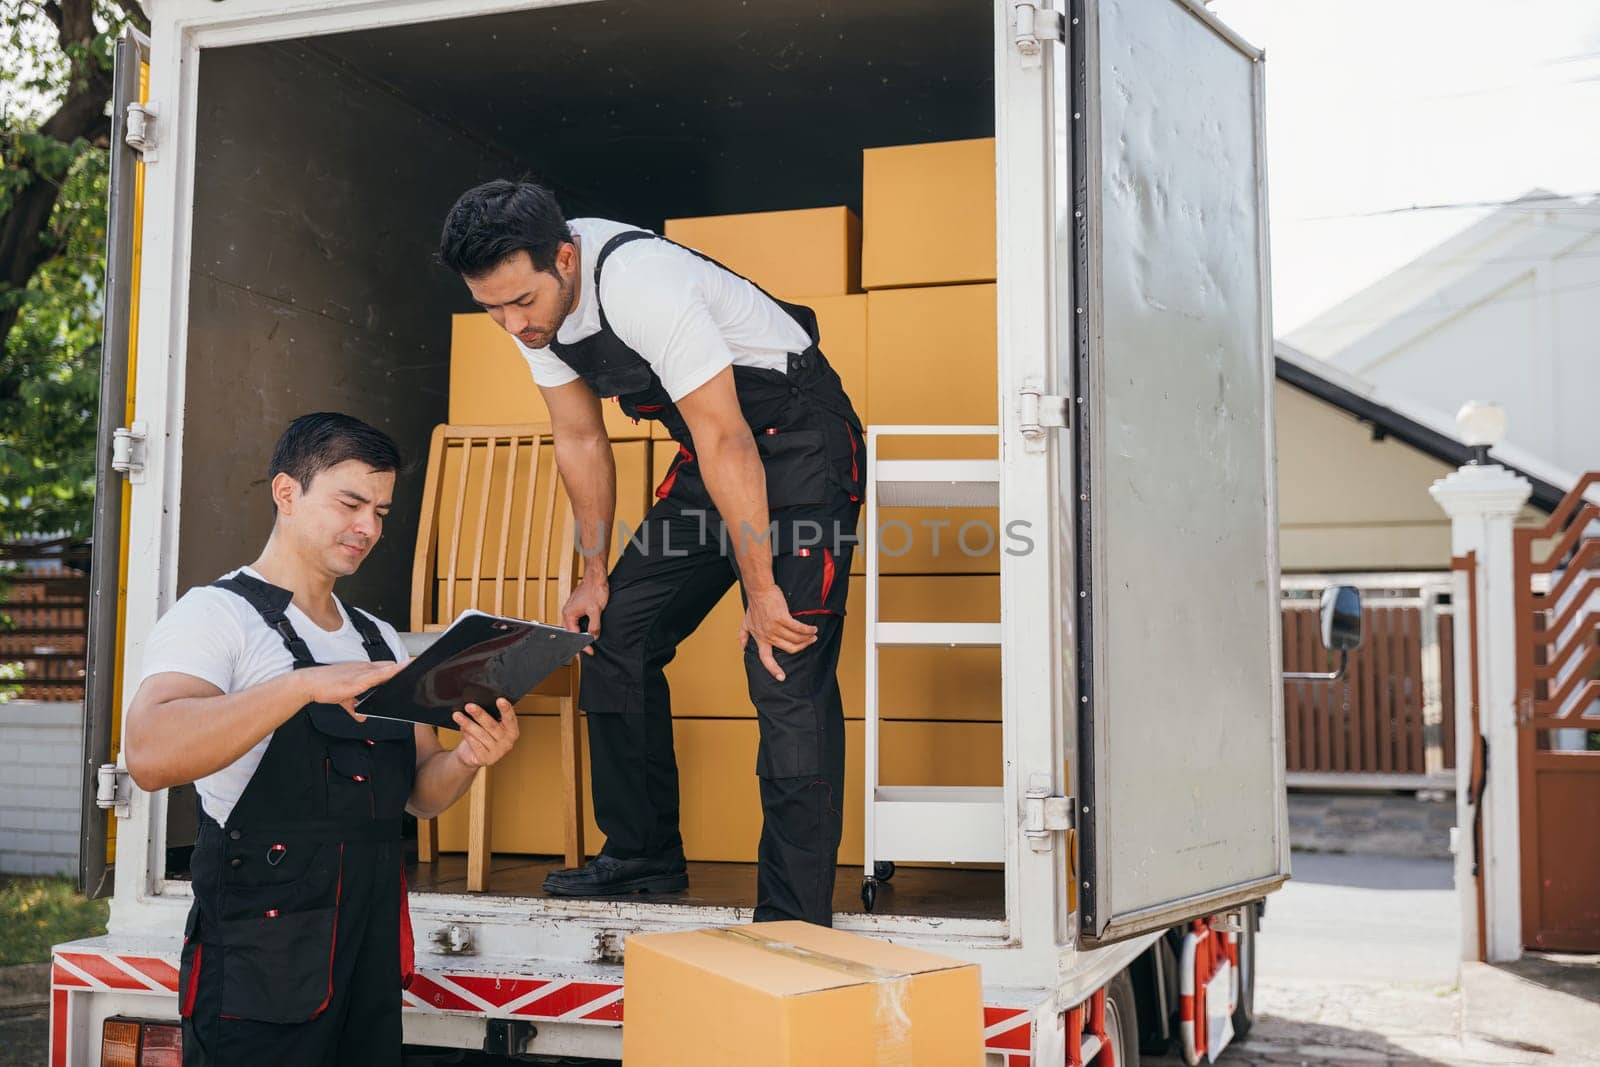 Mover workers unload boxes inspecting shipment with a clipboard near the truck. Professional delivery team ensures seamless relocation and efficient service. Moving day concept by Sorapop